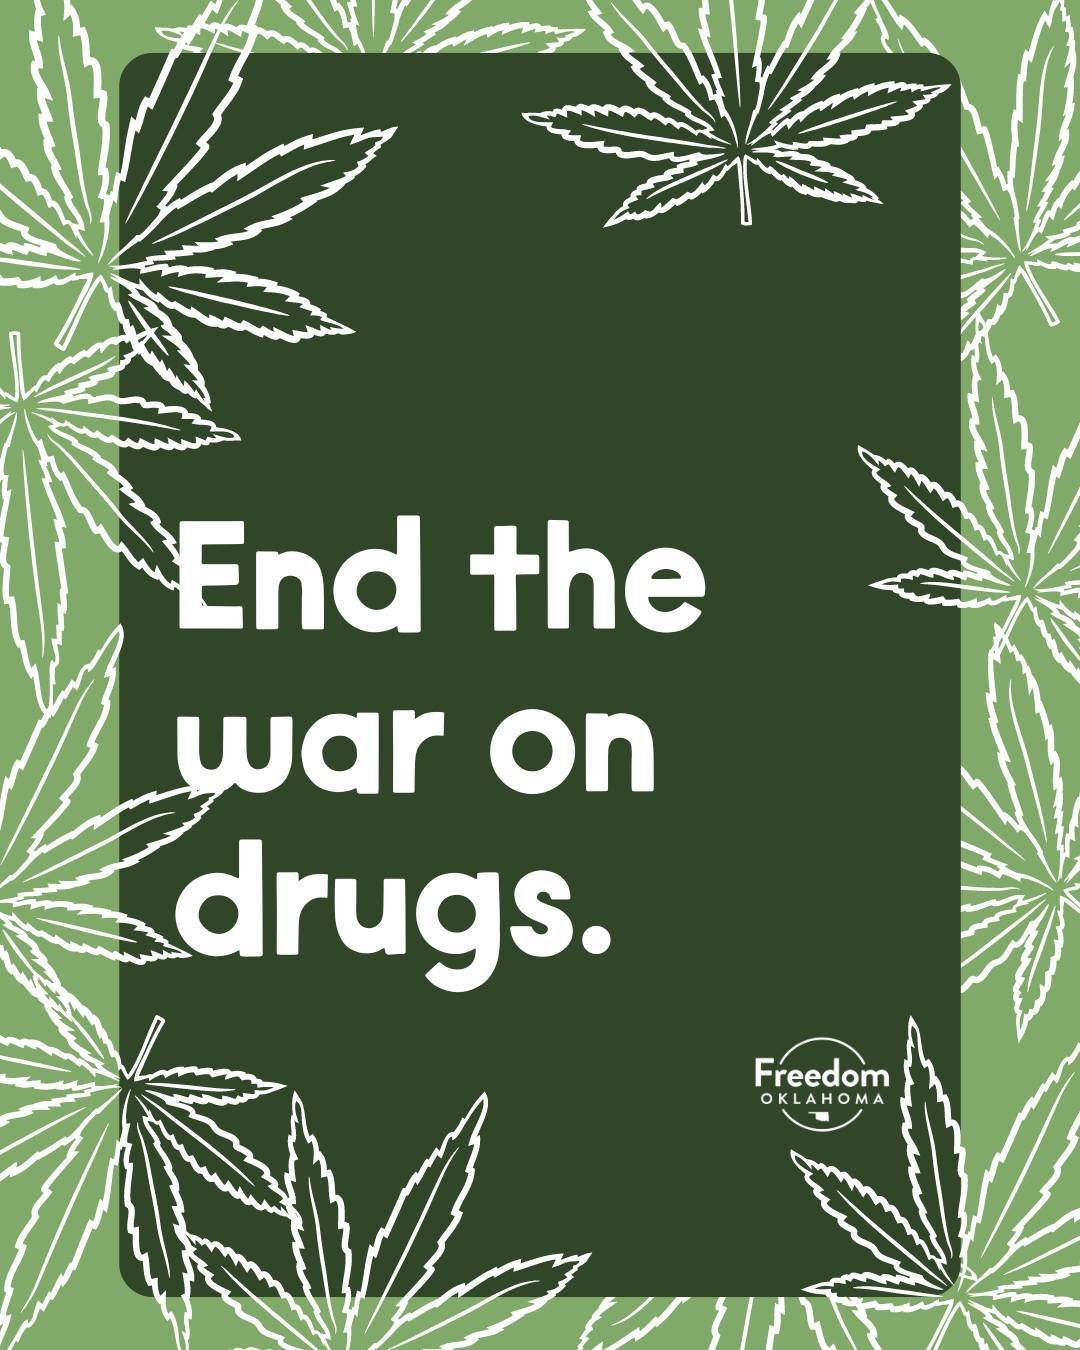 As folks celebrate this 4/20, we remember that some of the earliest known marijuana decriminalization victories were led by 2SLGBTQ+ activists, particularly those of color, as a way to provide healing and solace to the many within our community durin